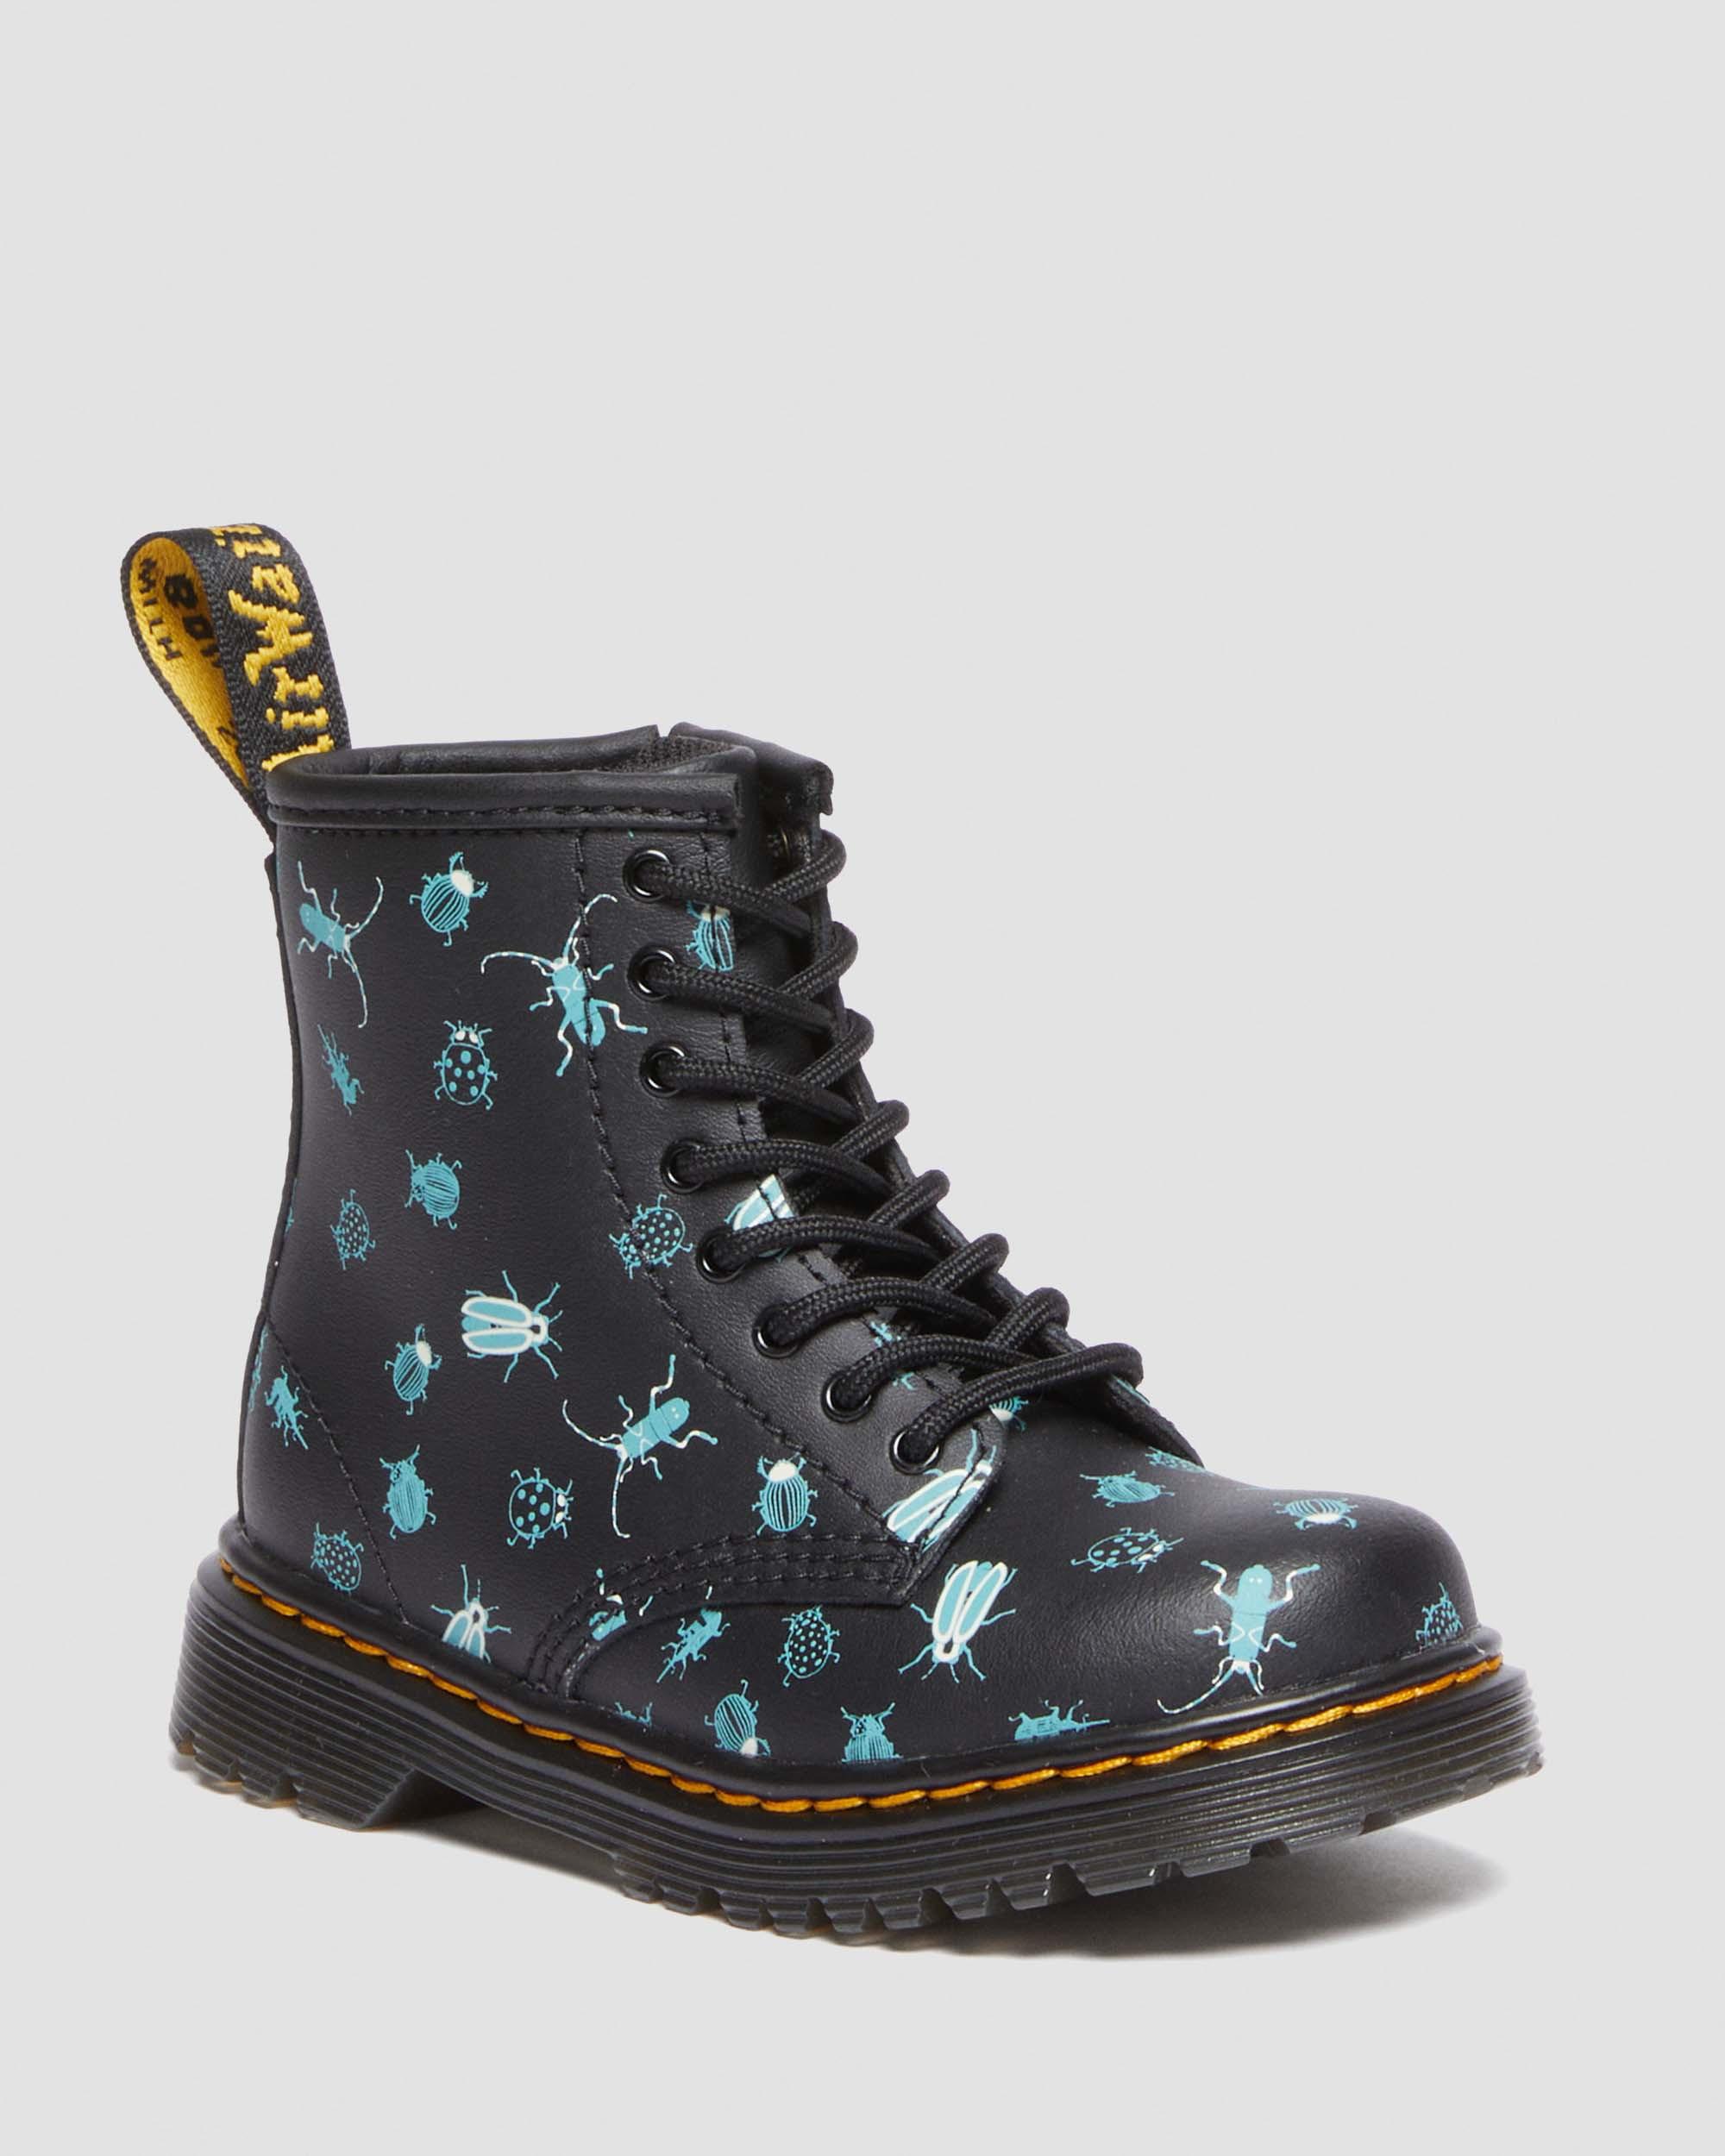 Toddler 1460 Glow in the Dark Bugs Lace Up Boots | Dr. Martens